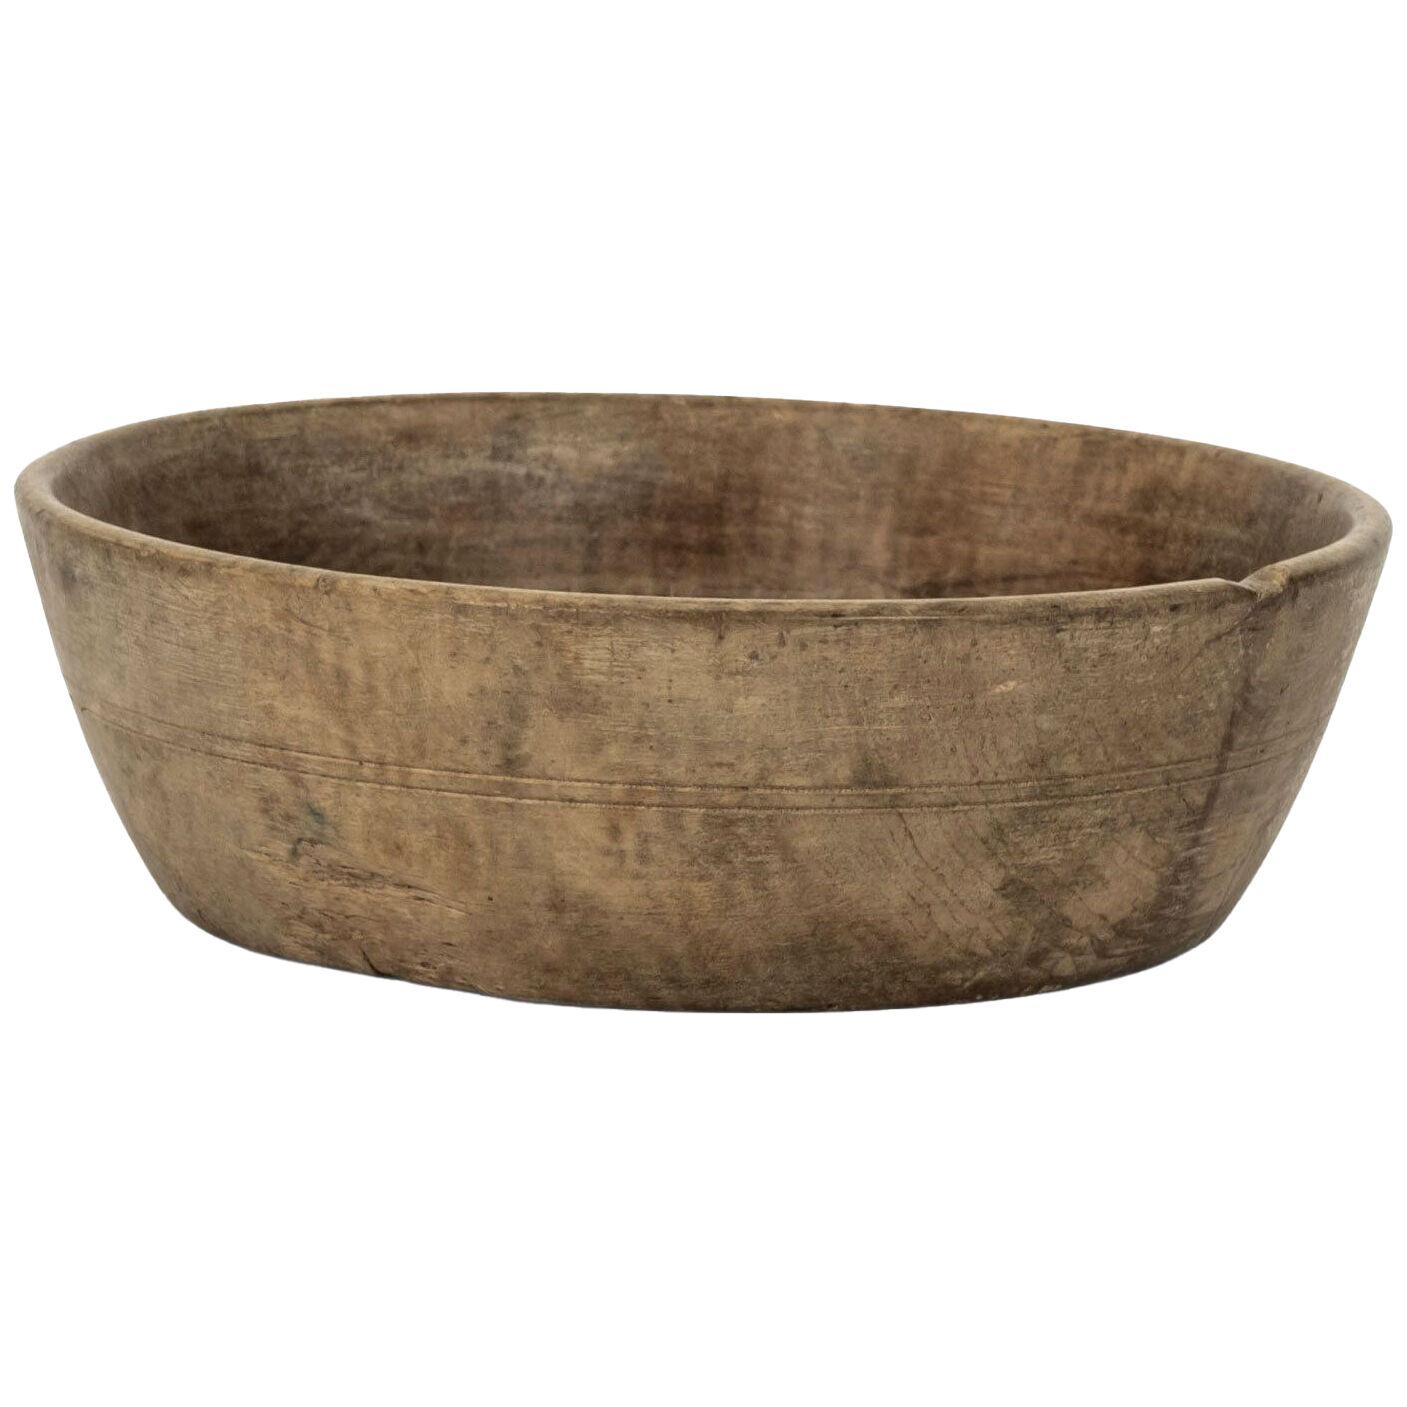 Round Carved Root Bowl from Sweden